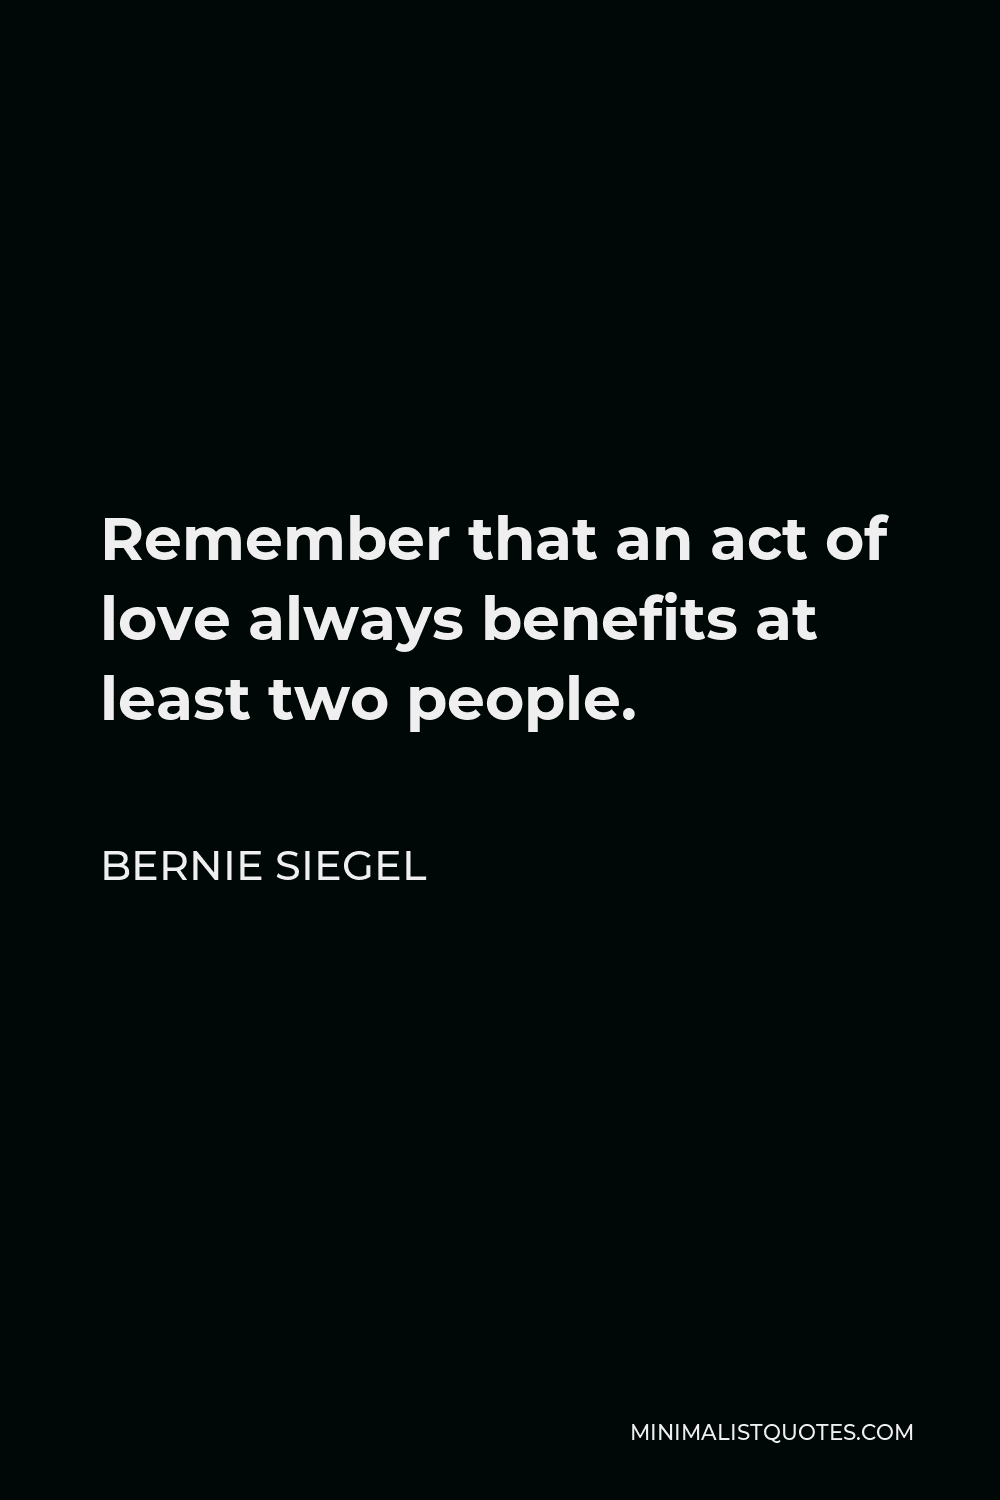 Bernie Siegel Quote - Remember that an act of love always benefits at least two people.